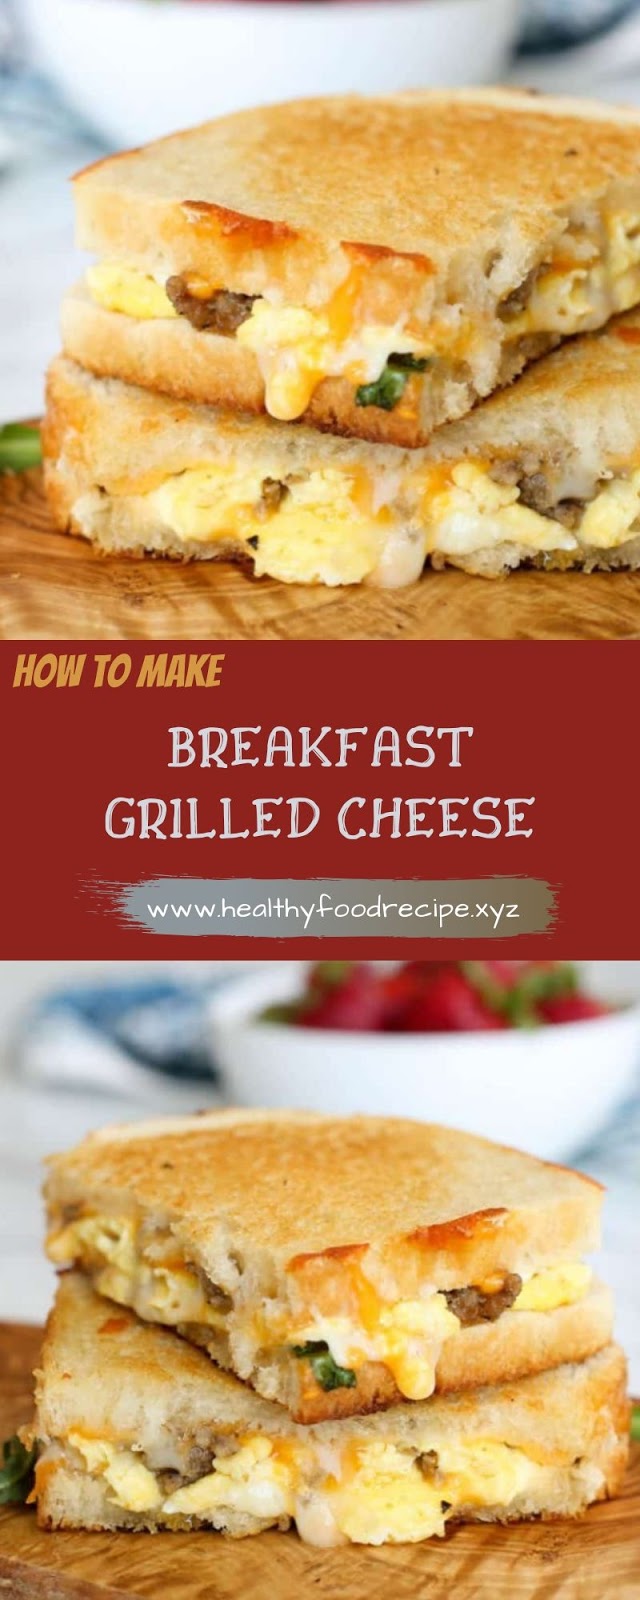 BREAKFAST GRILLED CHEESE